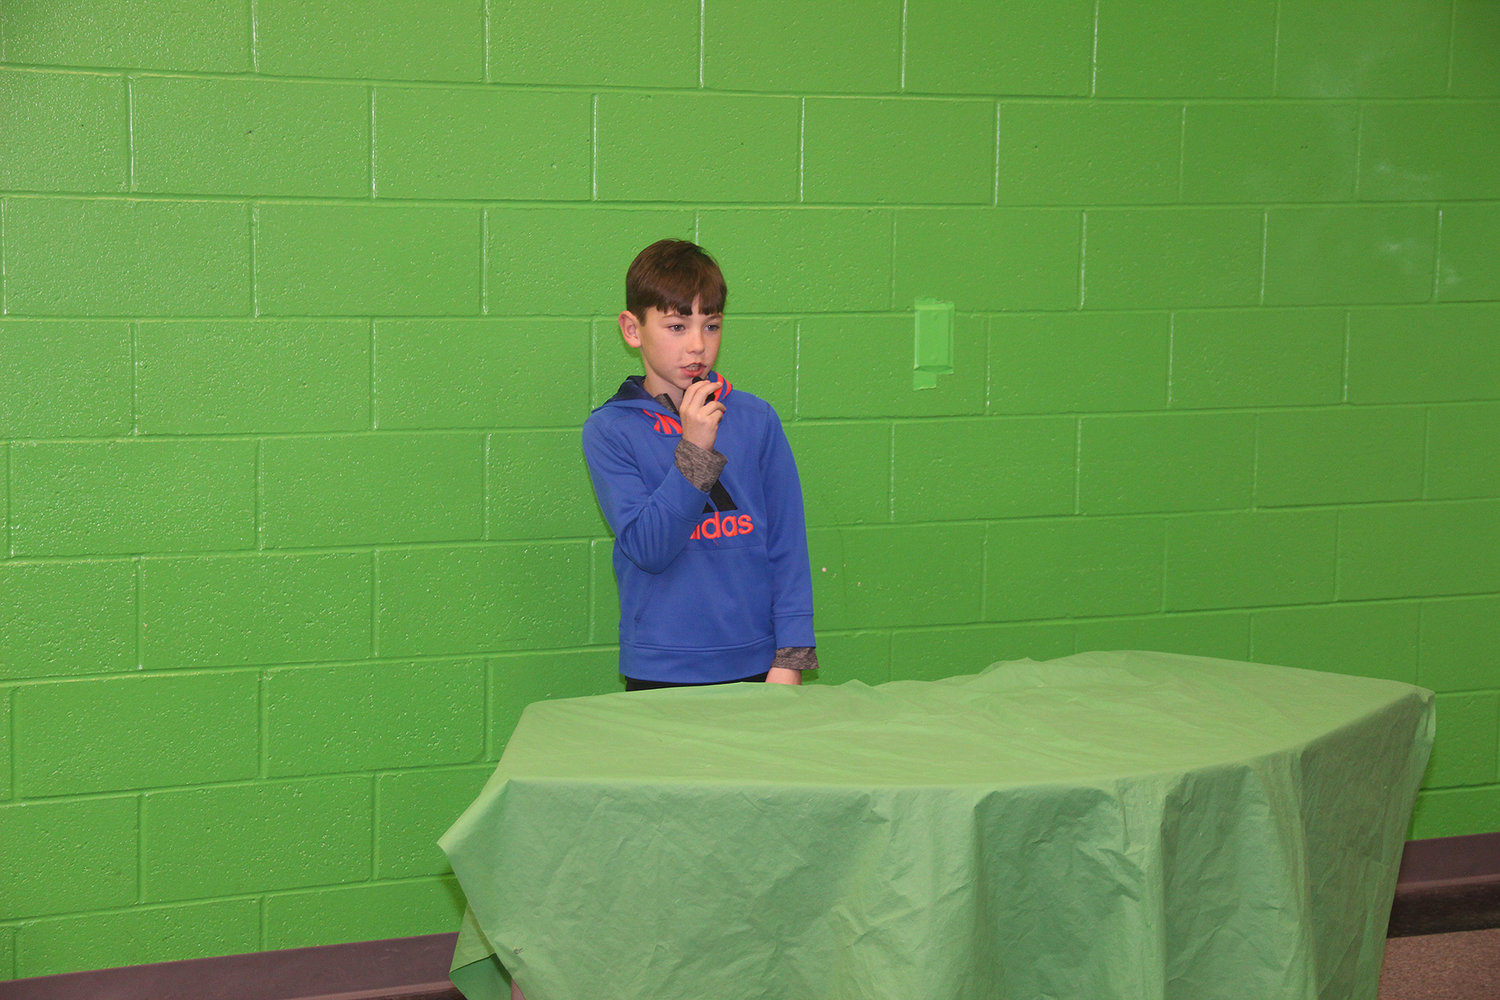 AND NOW, THE WEATHER — Rebecca Boone fifth grader Ryder Augusta delivers the day's weather forecast as part of daily, student-produced news videos at the school. Students script, film and edit the videos largely on their own.